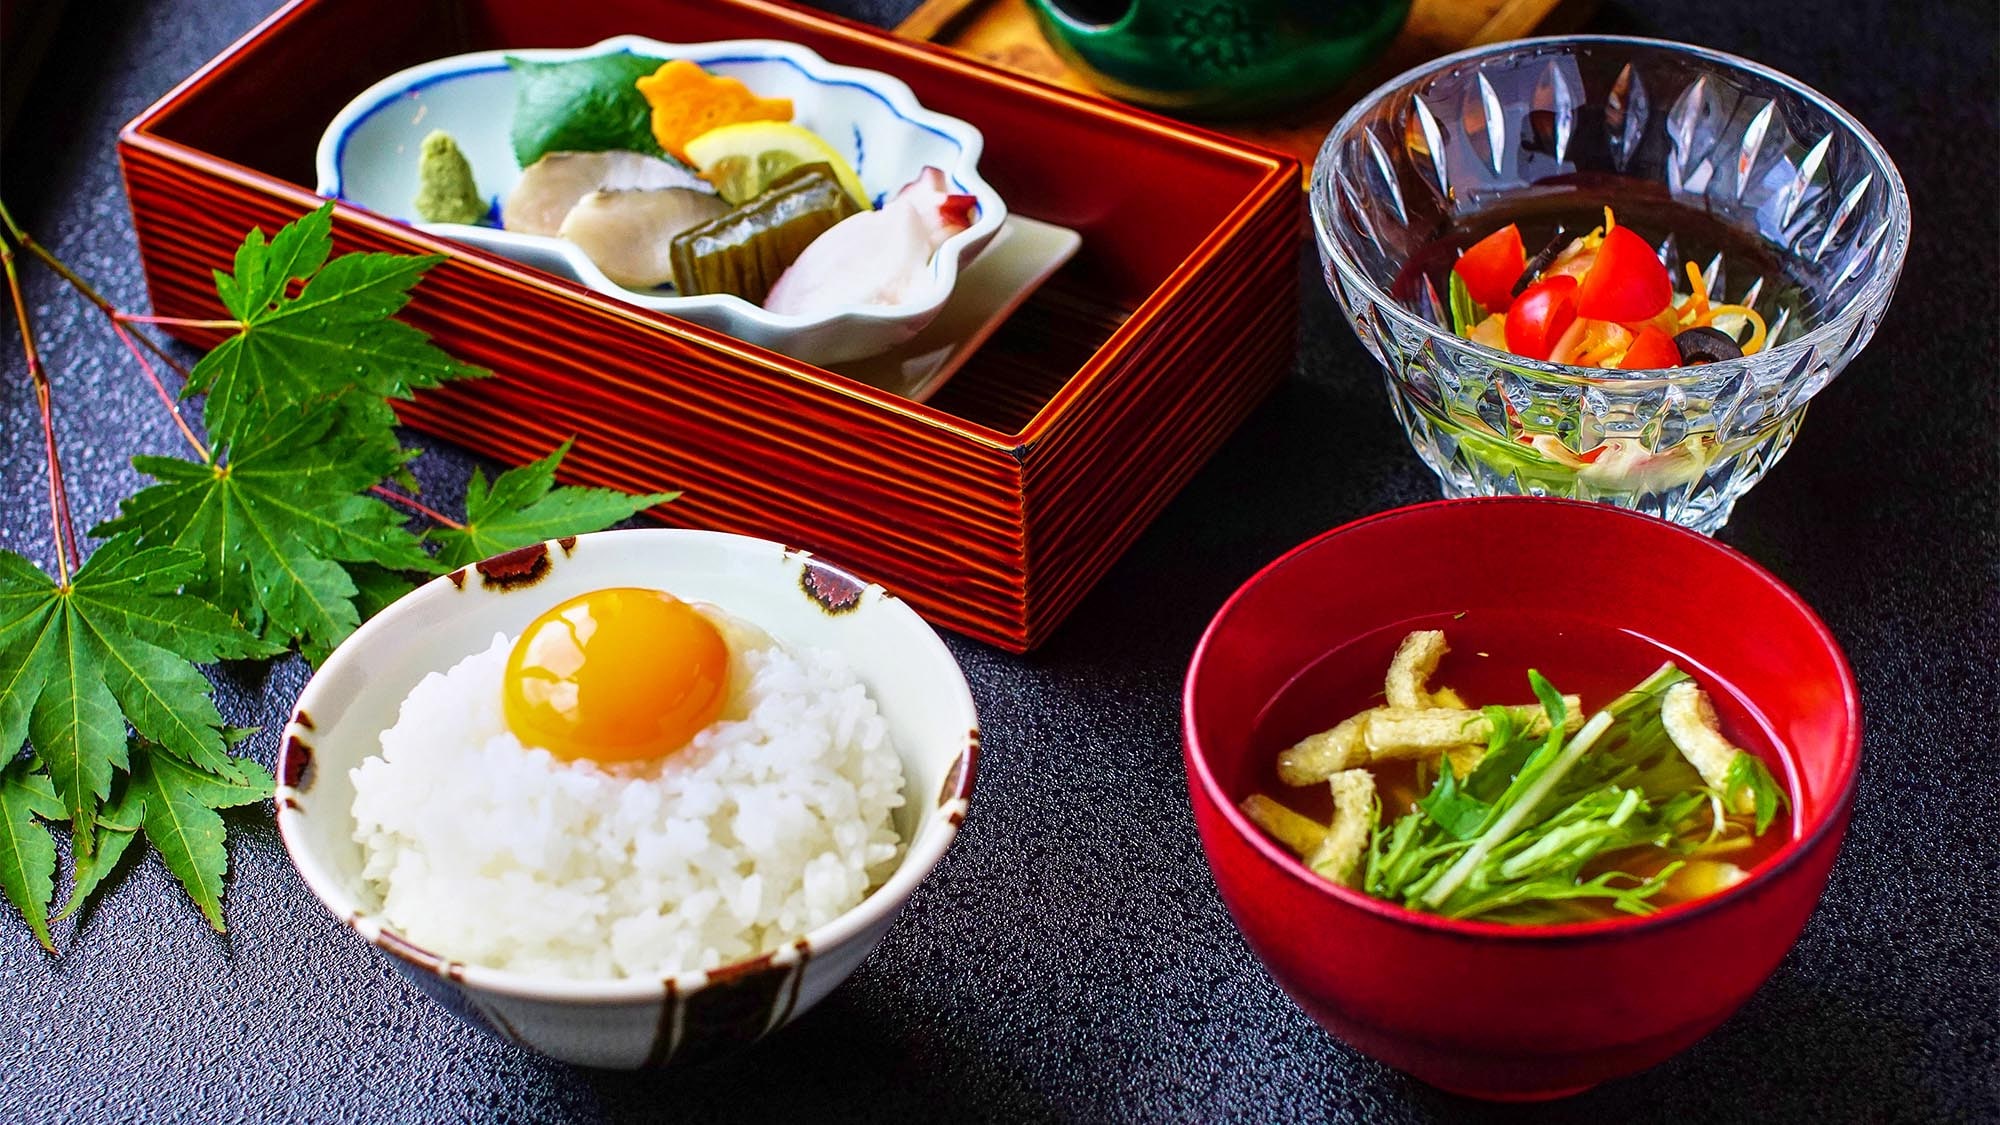 ・ Breakfast example / We manage our health in an open poultry house and boast healthy eggs grown by eating delicious rice from Toyama prefecture.